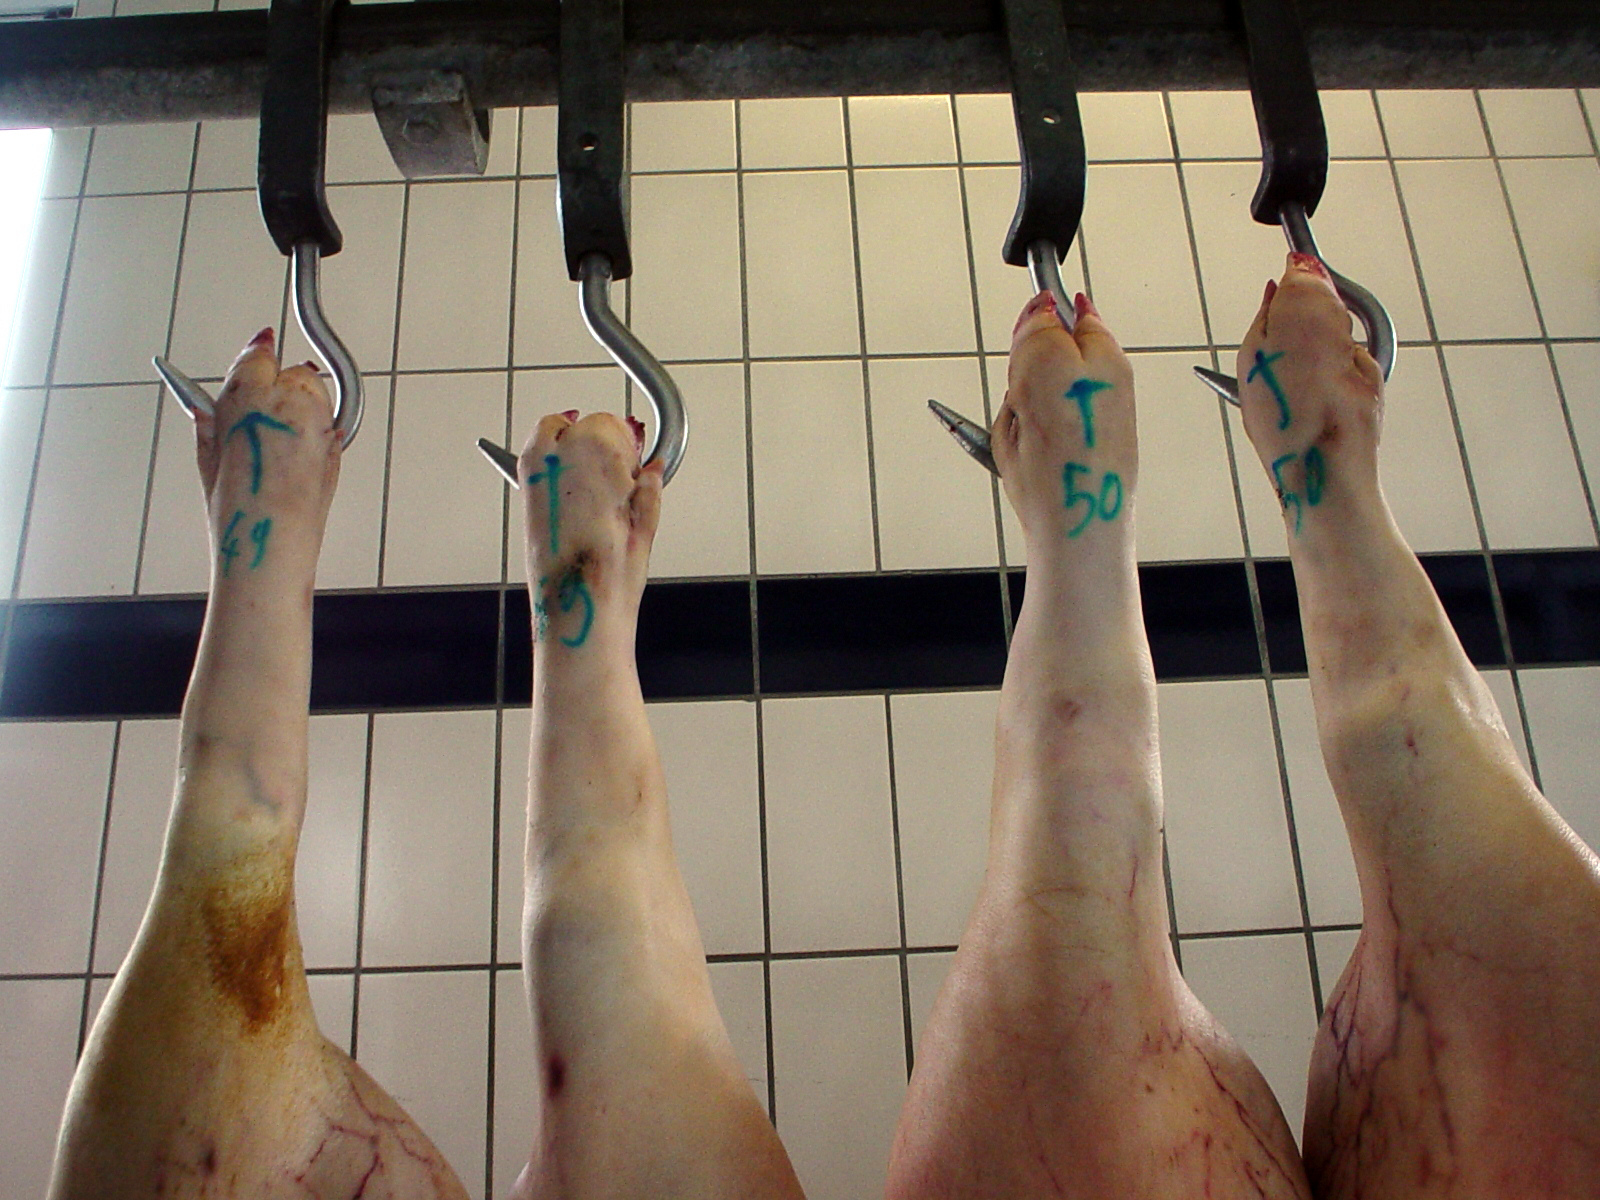 pigs hung by their feet after slaughter